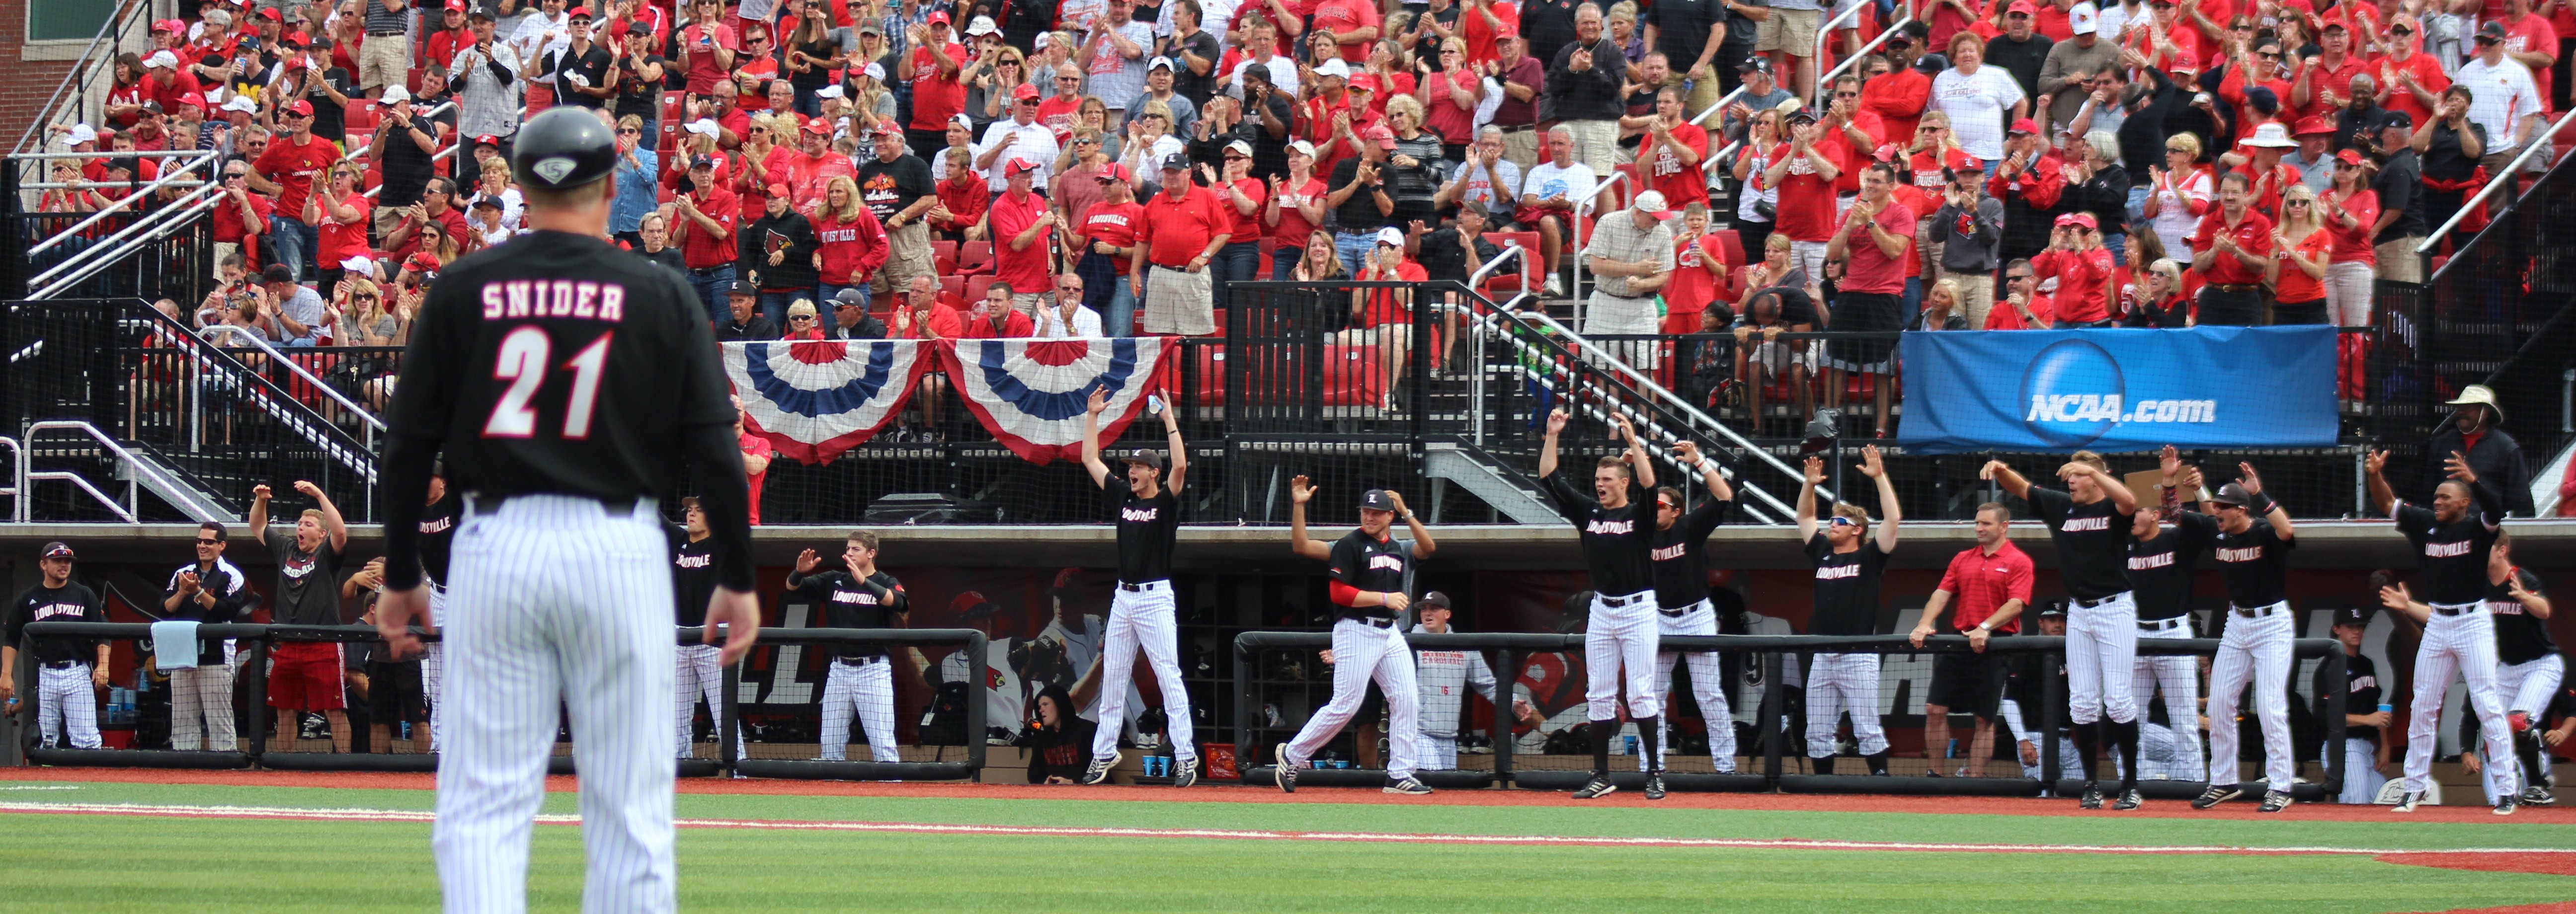 Dugout Celebration Louisville vs. Michigan 5-31-15 Photo by Mark Blankenbaker Fitted